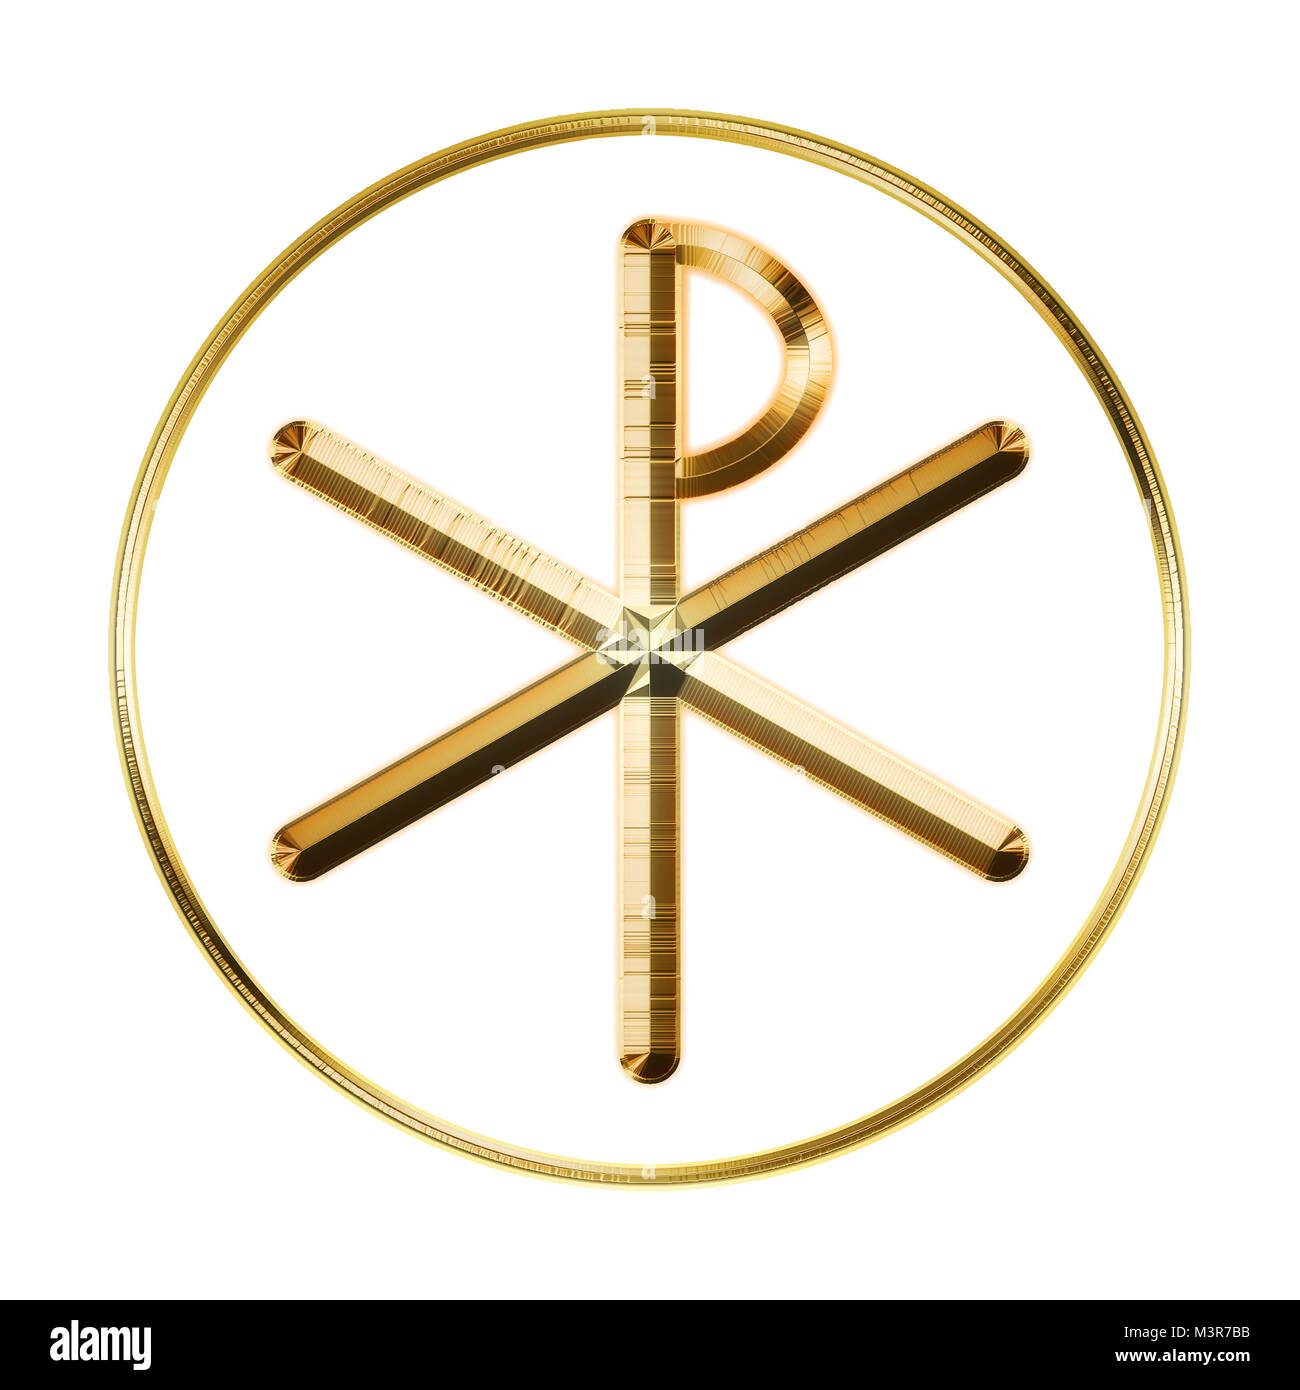 The ancient Christian Chi-Rho symbol from the first two letters of 'Christ' in Greek. Stock Photo